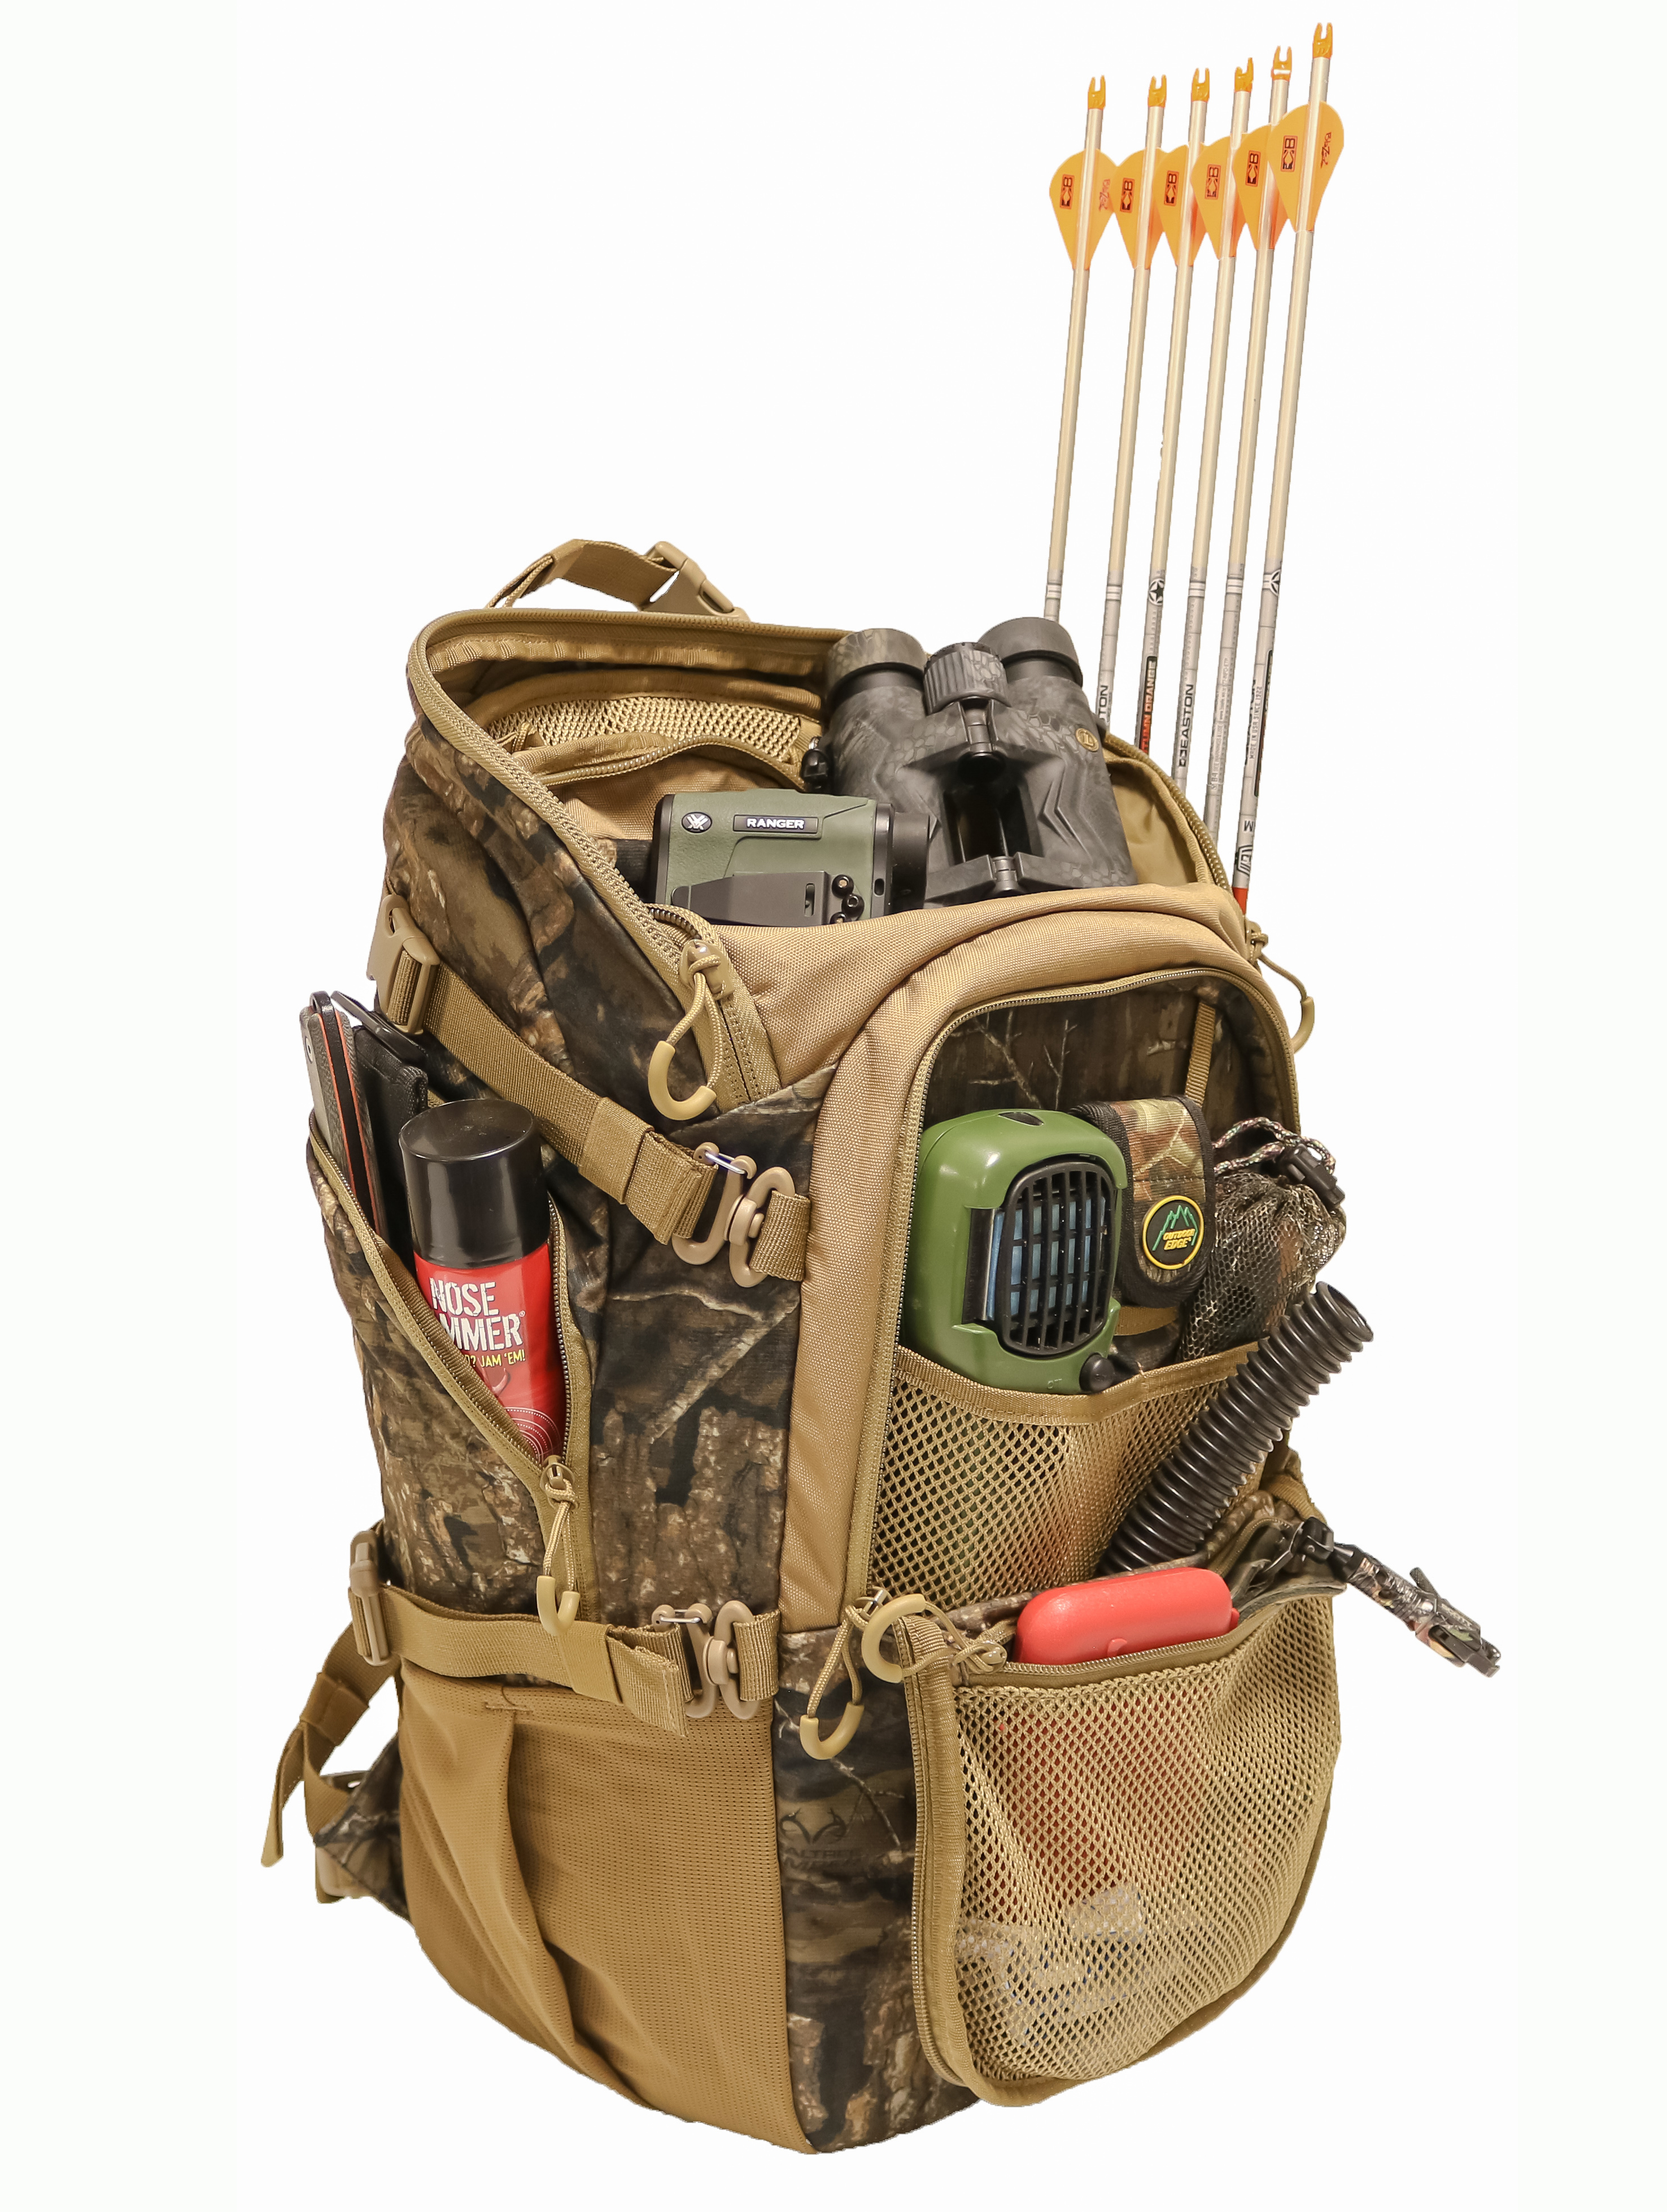 Nexgen Outfitters Whitetail Caddy is Perfect for First Time Hunter